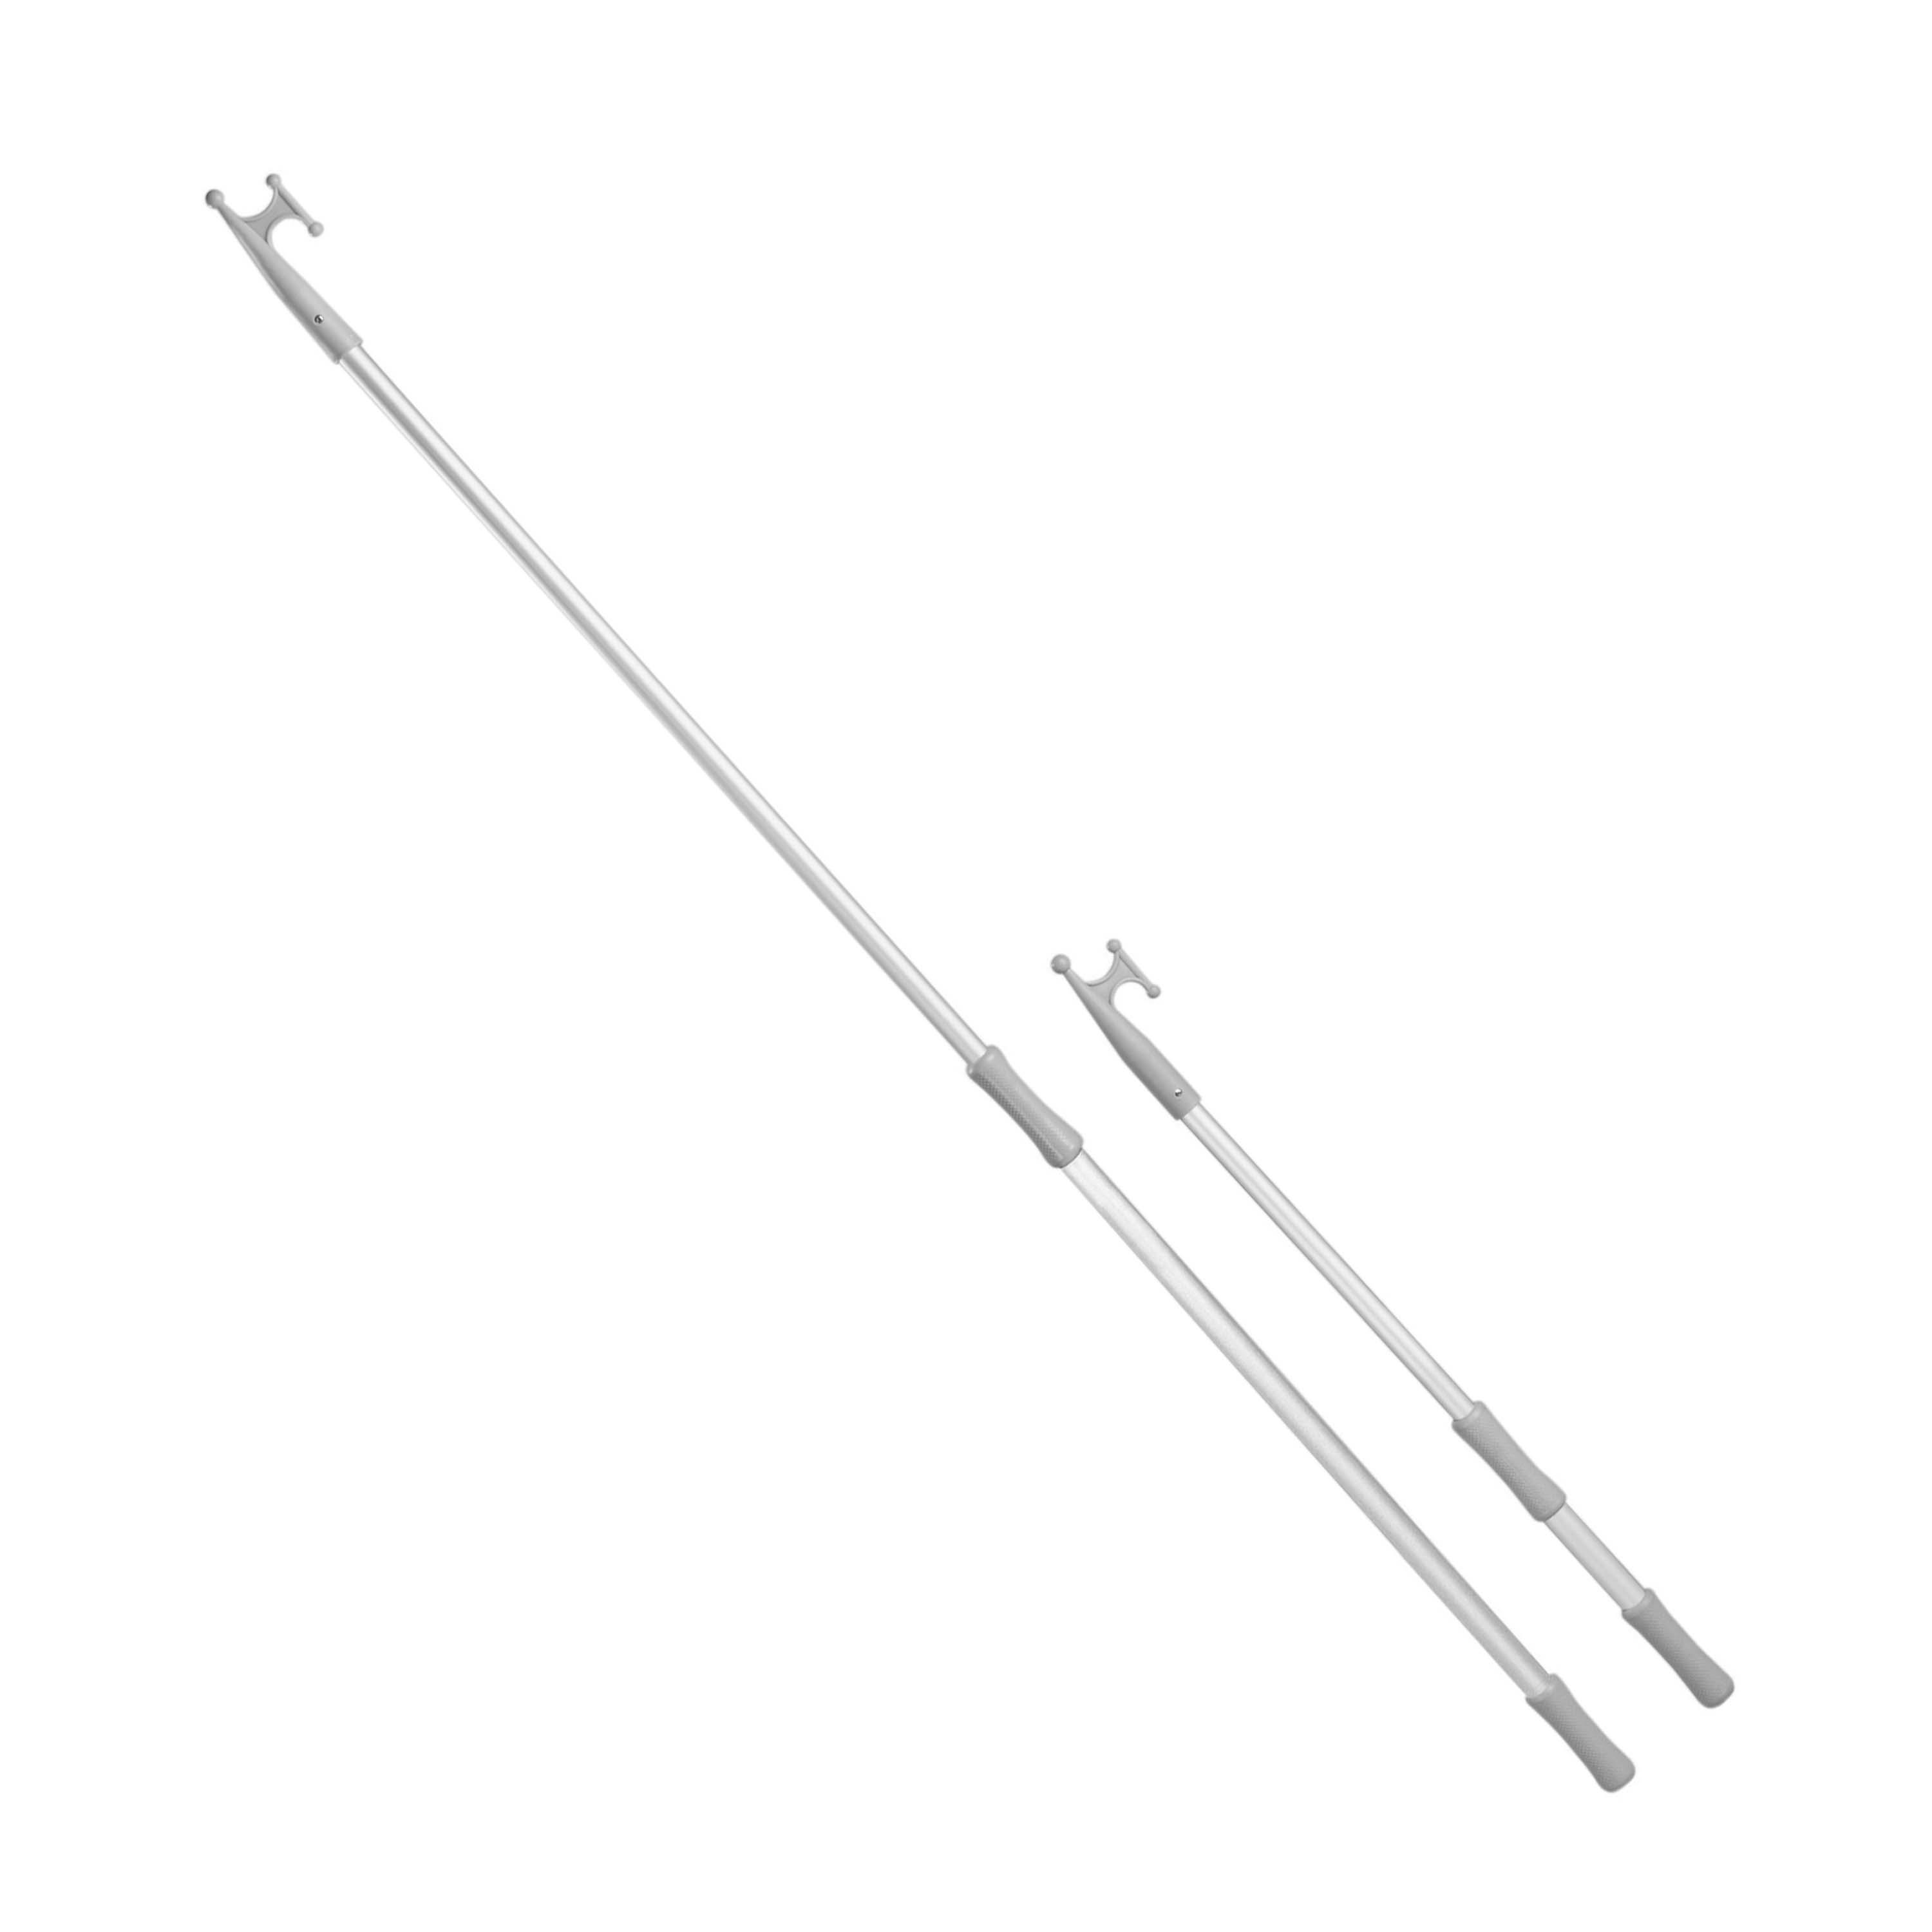 PLASTIMO TELESCOPIC BOAT HOOK 120/210 cm made from anodised alloy